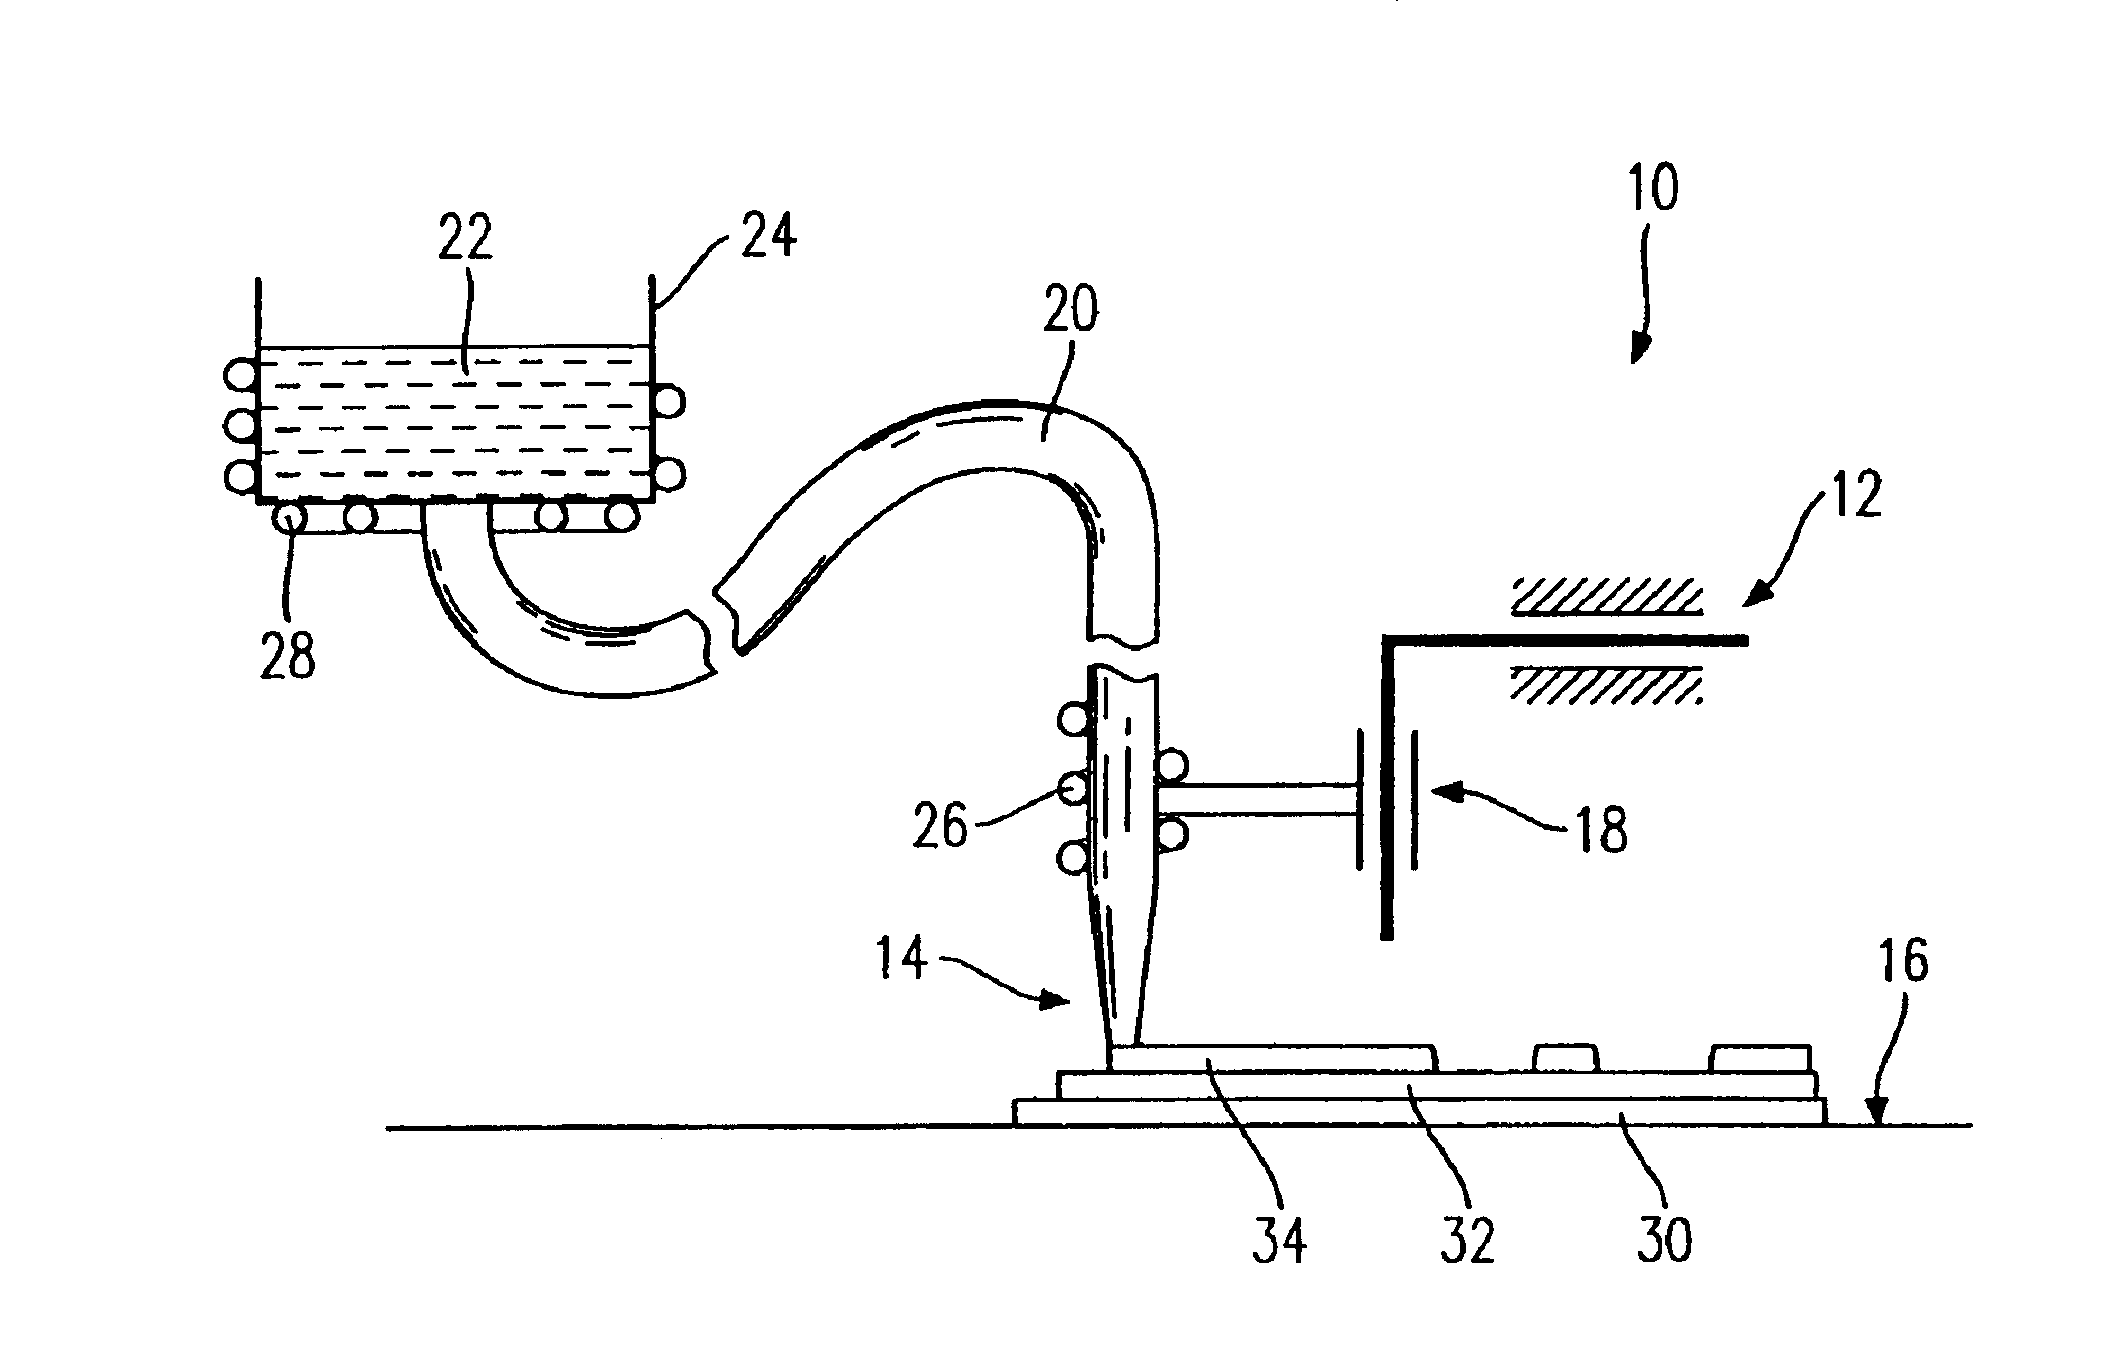 Desktop process for producing dental products by means of 3-dimensional plotting